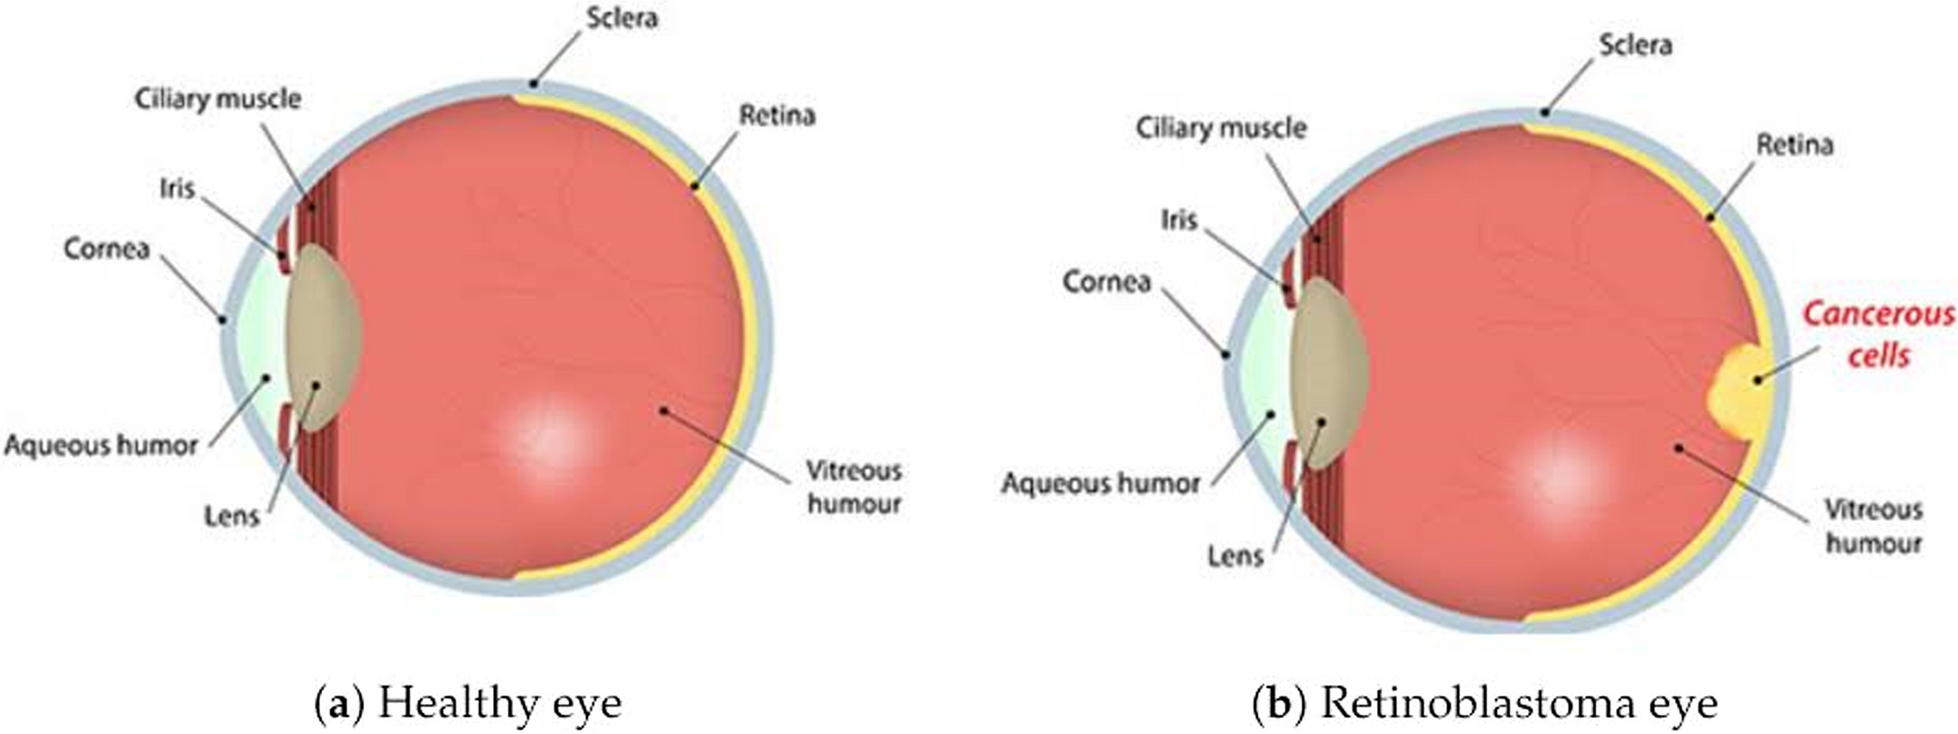 Nanotechnology-based strategies overcoming the challenges of retinoblastoma: a comprehensive overview and future perspectives